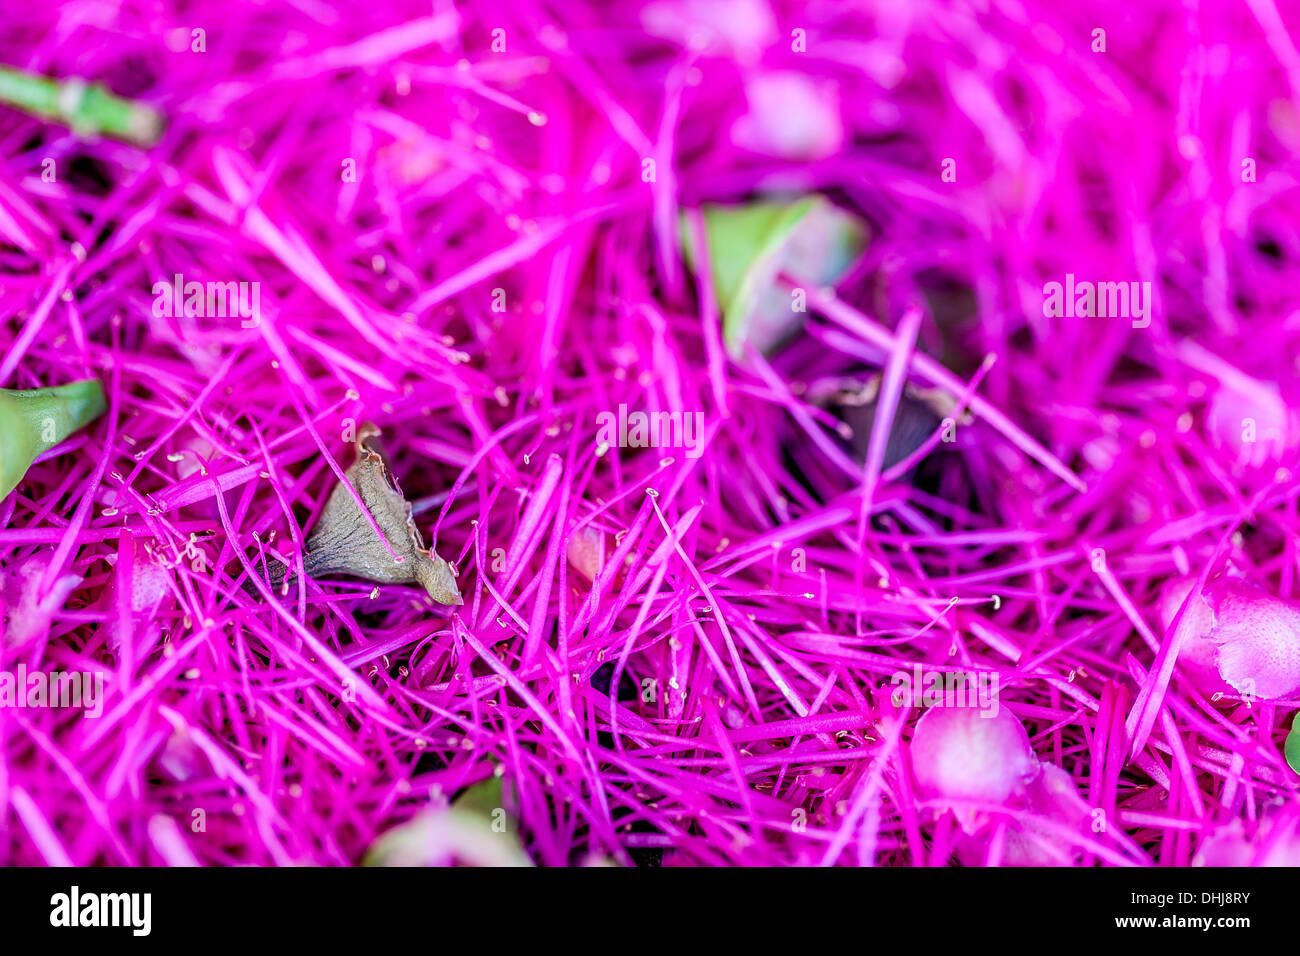 French cashew flower pedals fallen to the ground in a great profusion Stock Photo